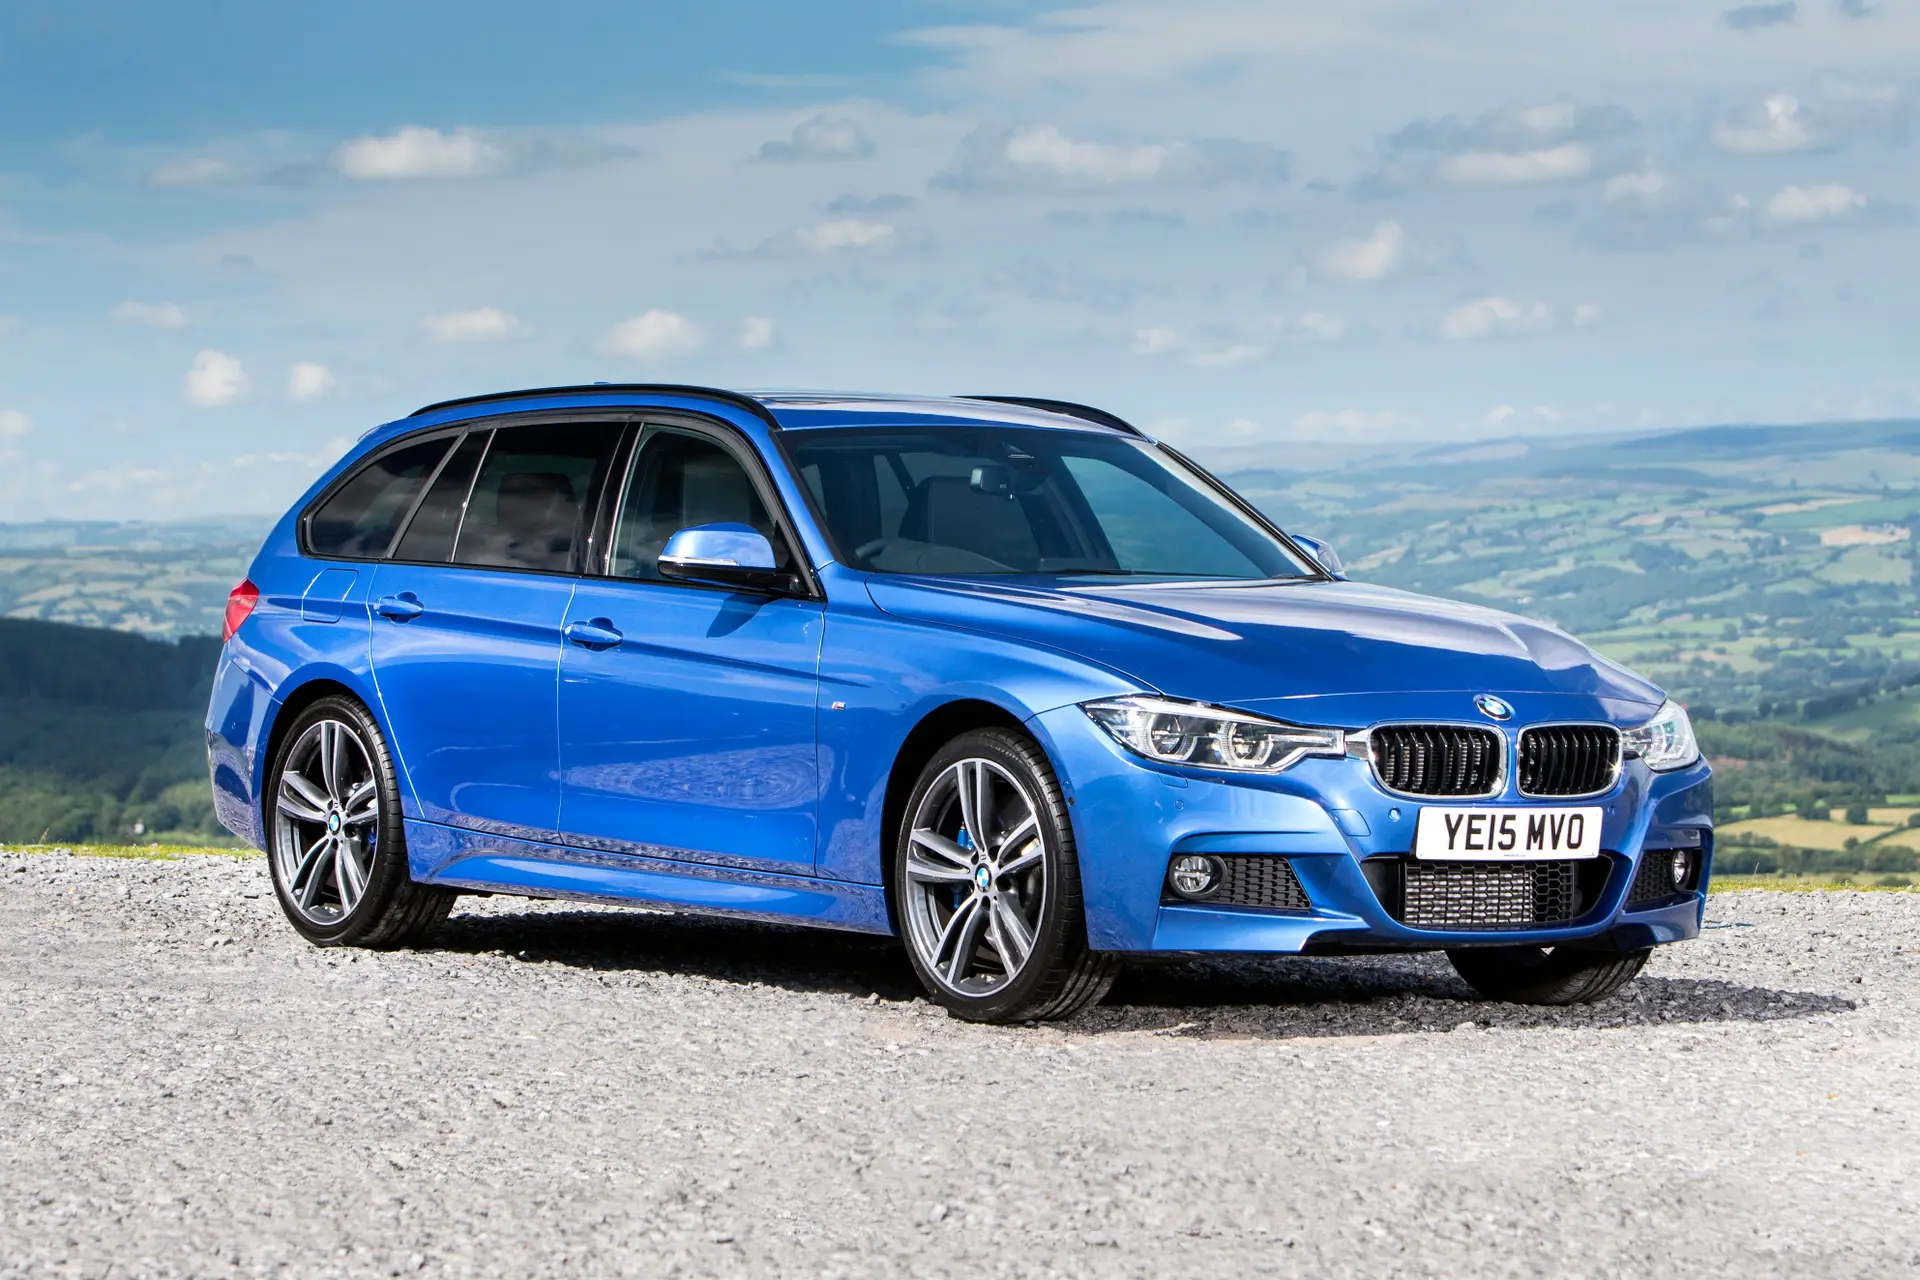 BMW 3 Series Touring (2012-2019) Review: exterior front three quarter photo of the BMW 3 Series Touring 